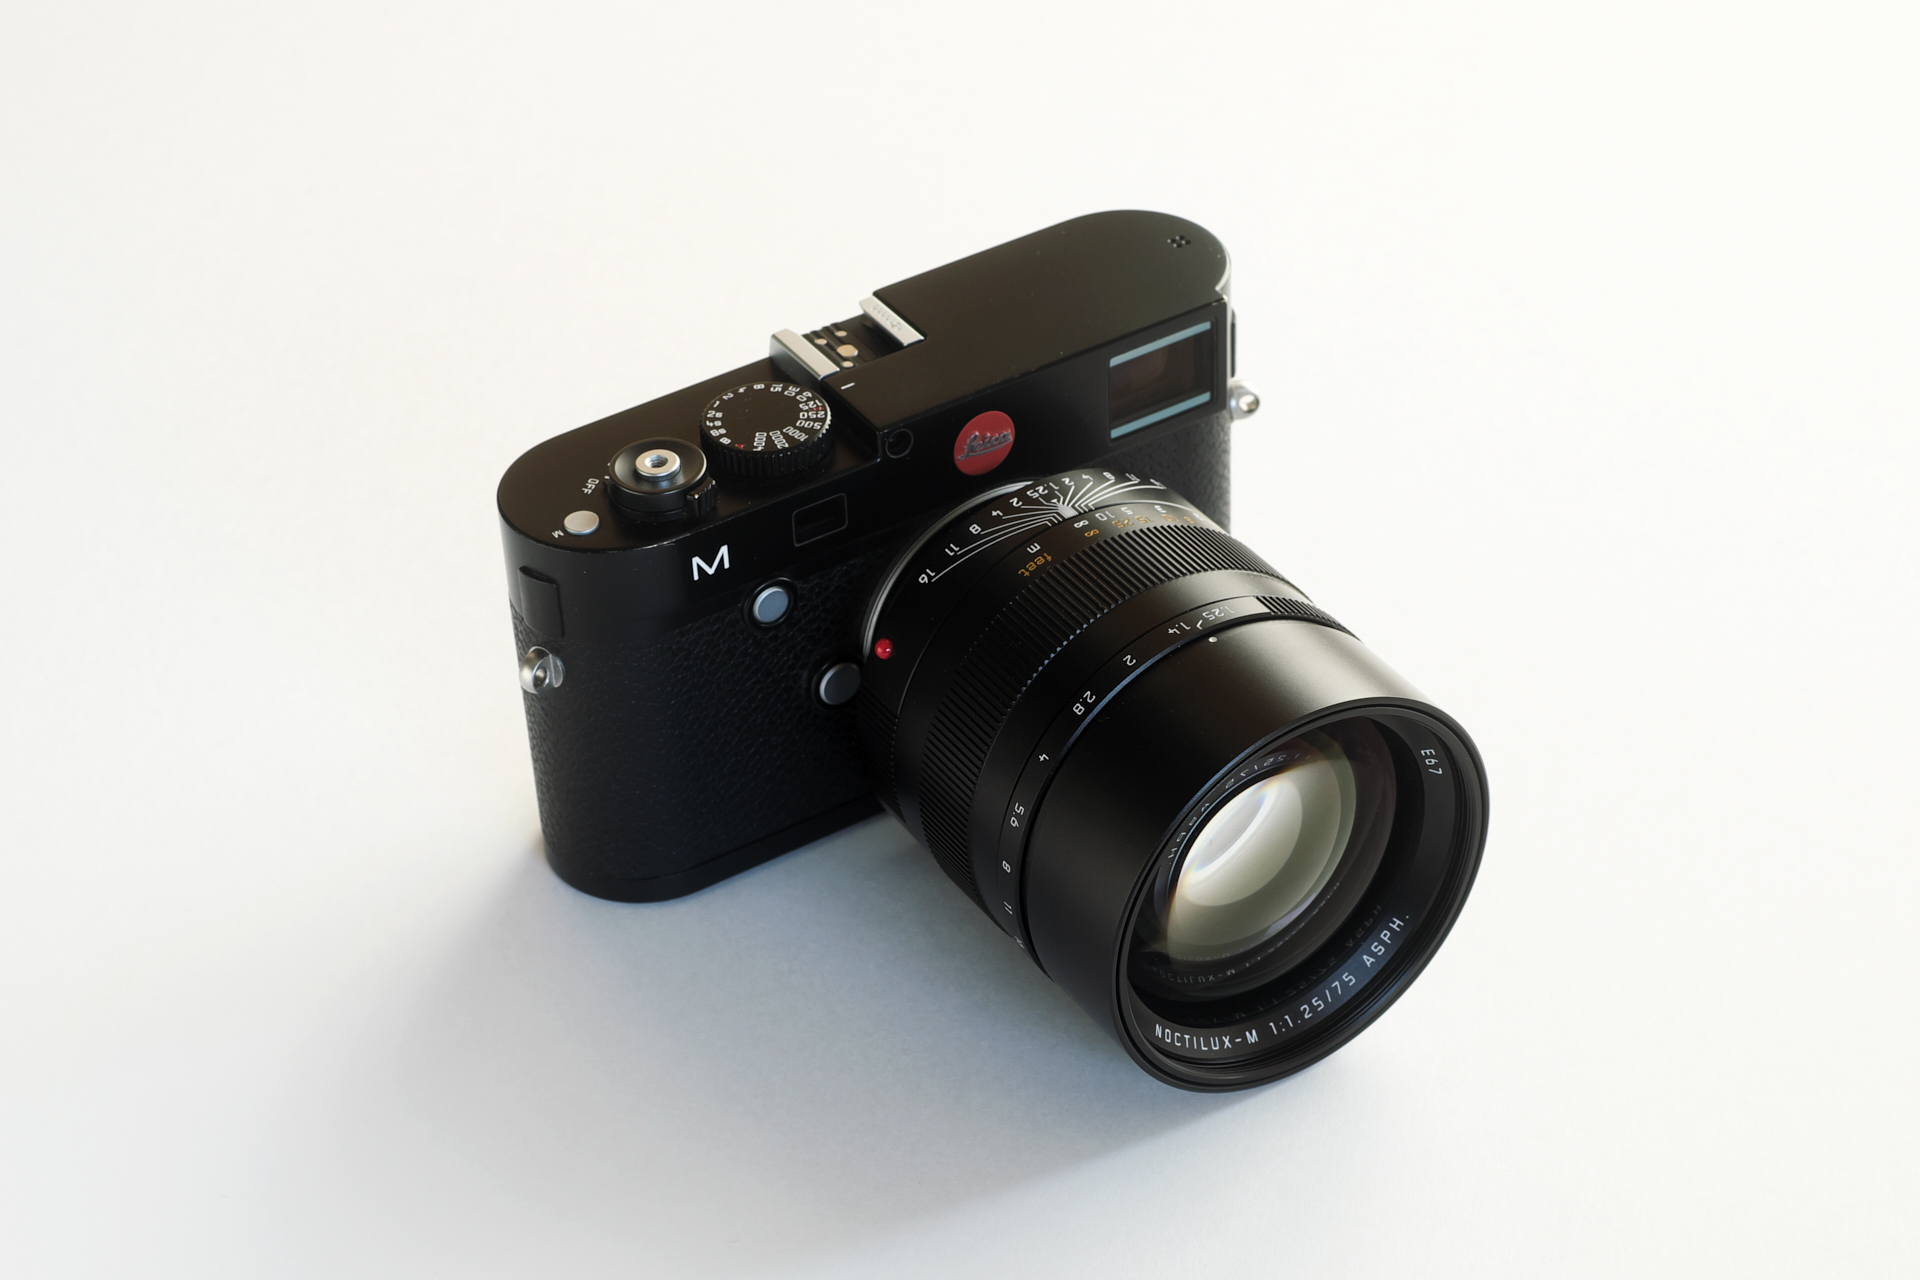 LEICA M (Typ240), NOCTILUX-M f1.25/75mm ASPH., Photo by A.Inden